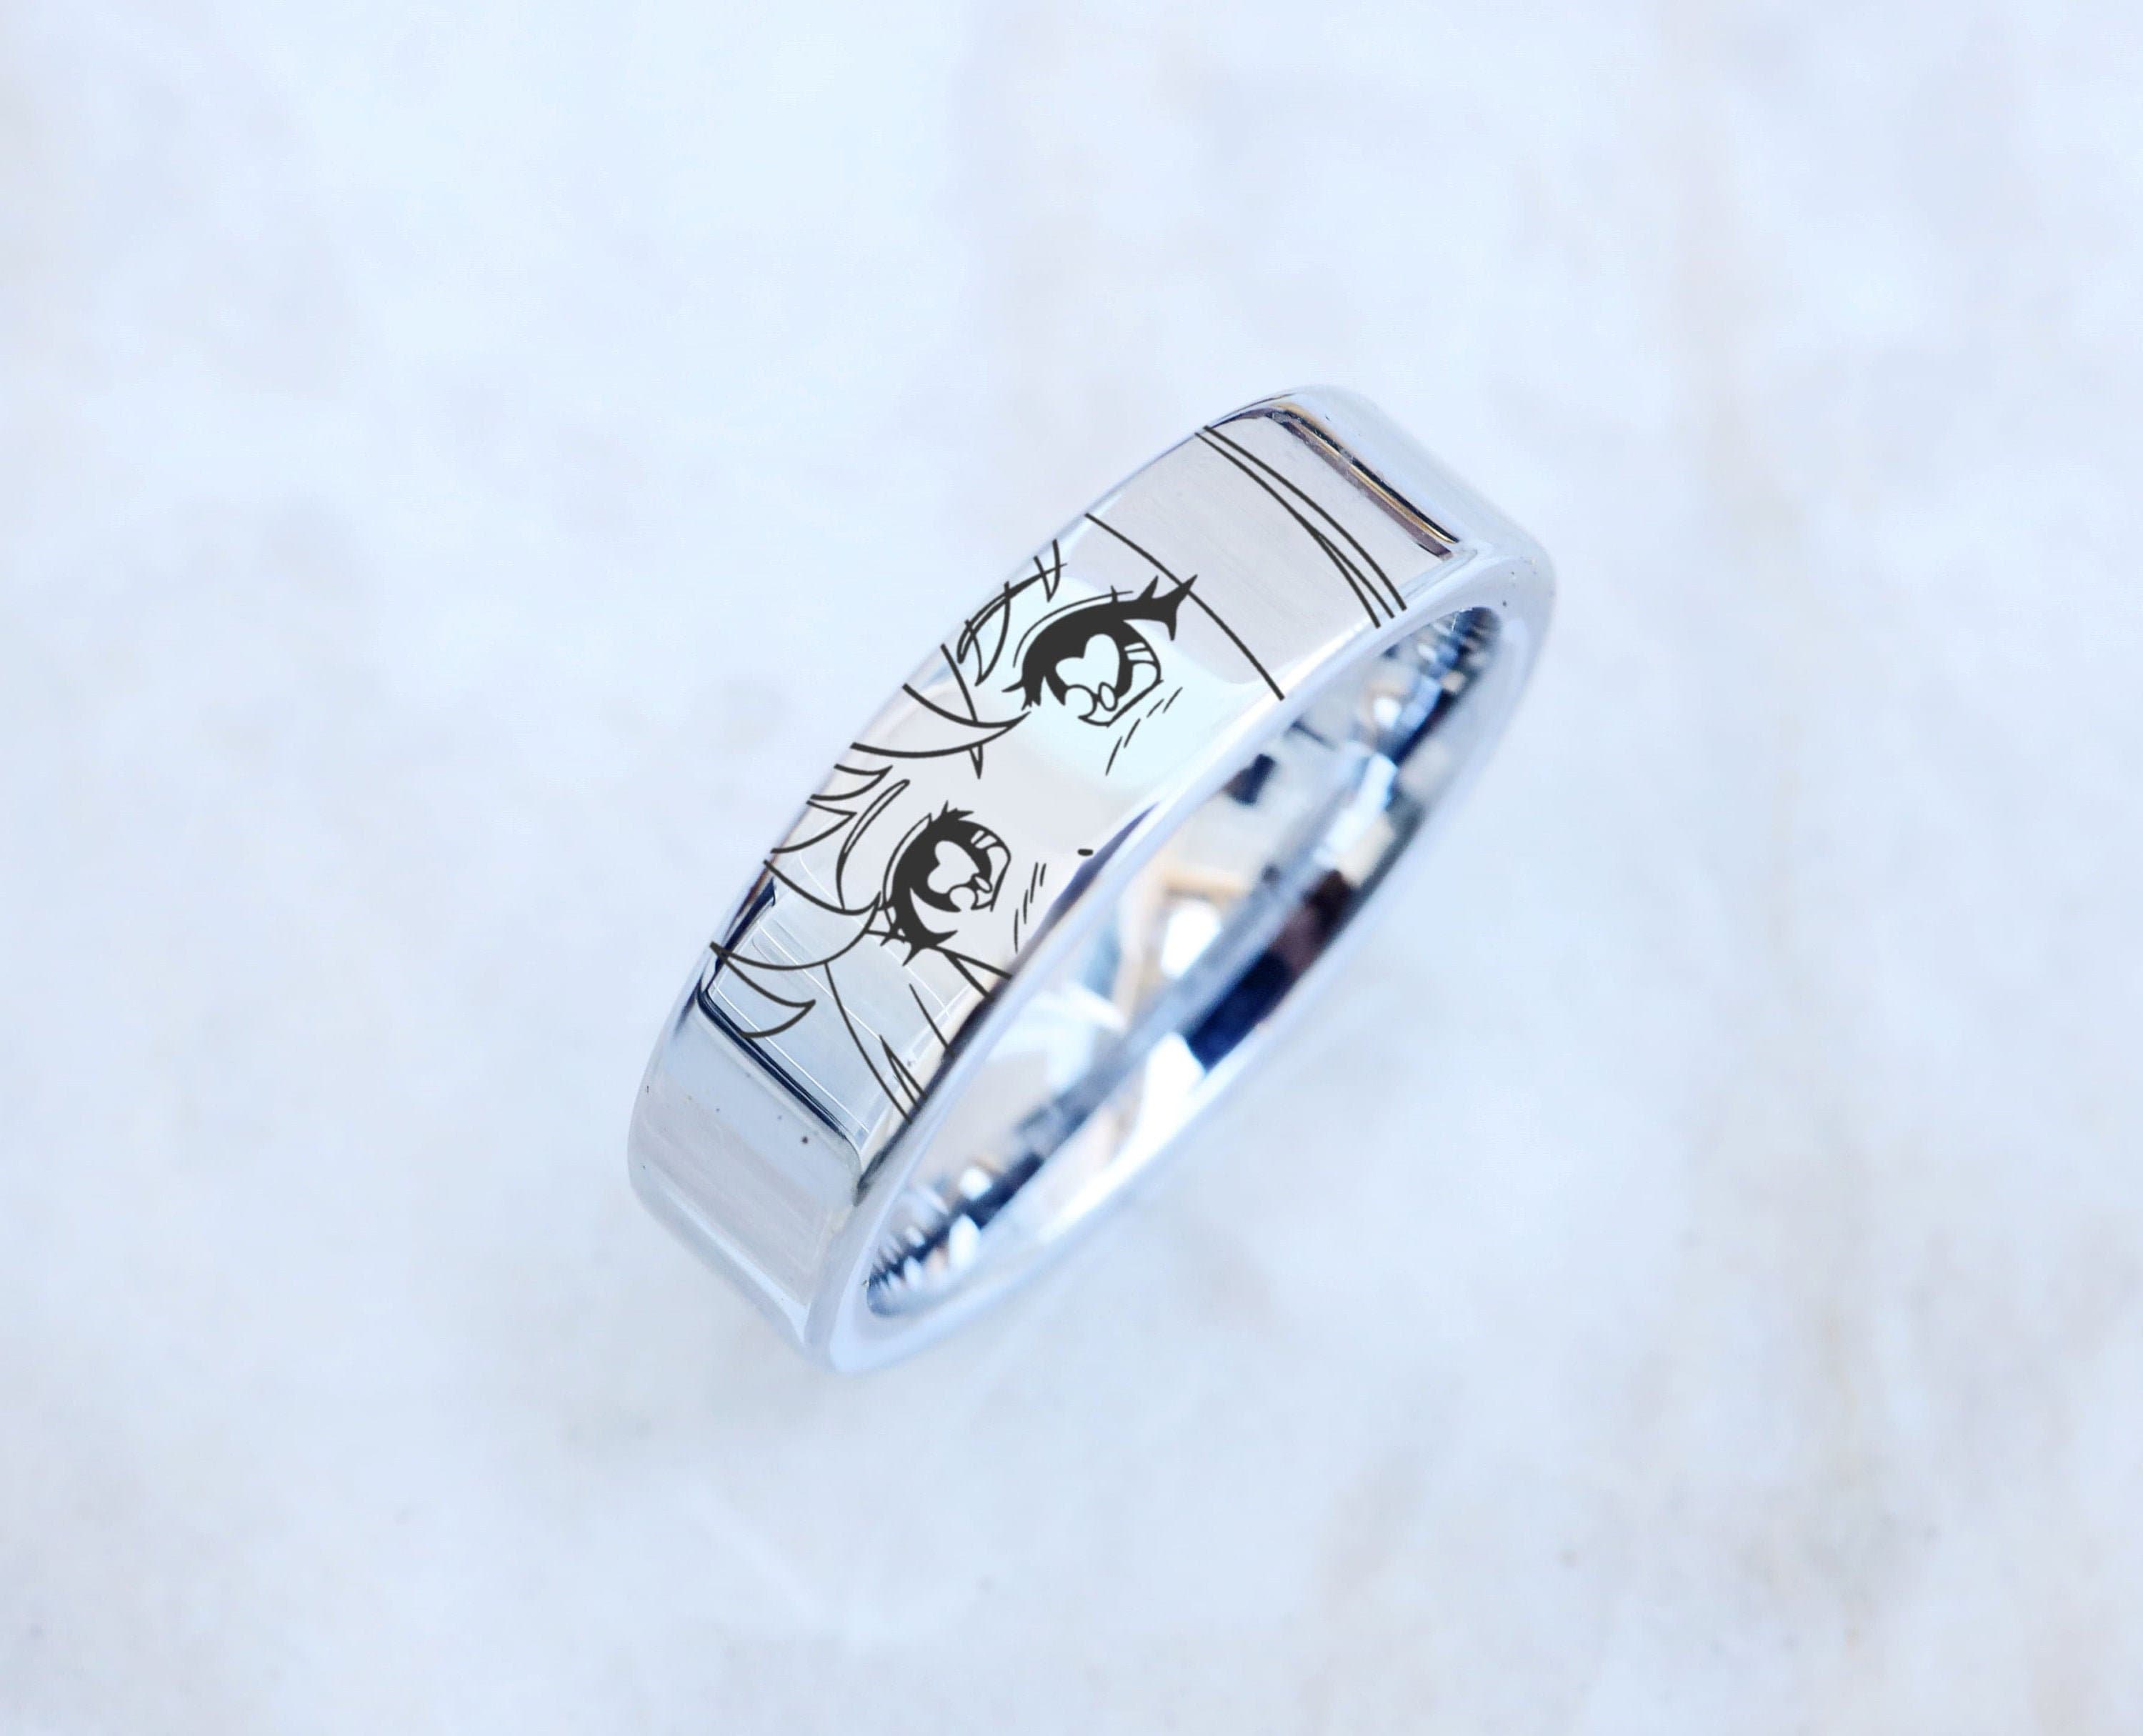 Buy 2pcs Anime Rings For Men BoysAkatsu Ring Set Jewelry Cosplay Itach  Stainless Steel Accessory Gift PartyBlack White NonPrecious Metal no  at Amazonin